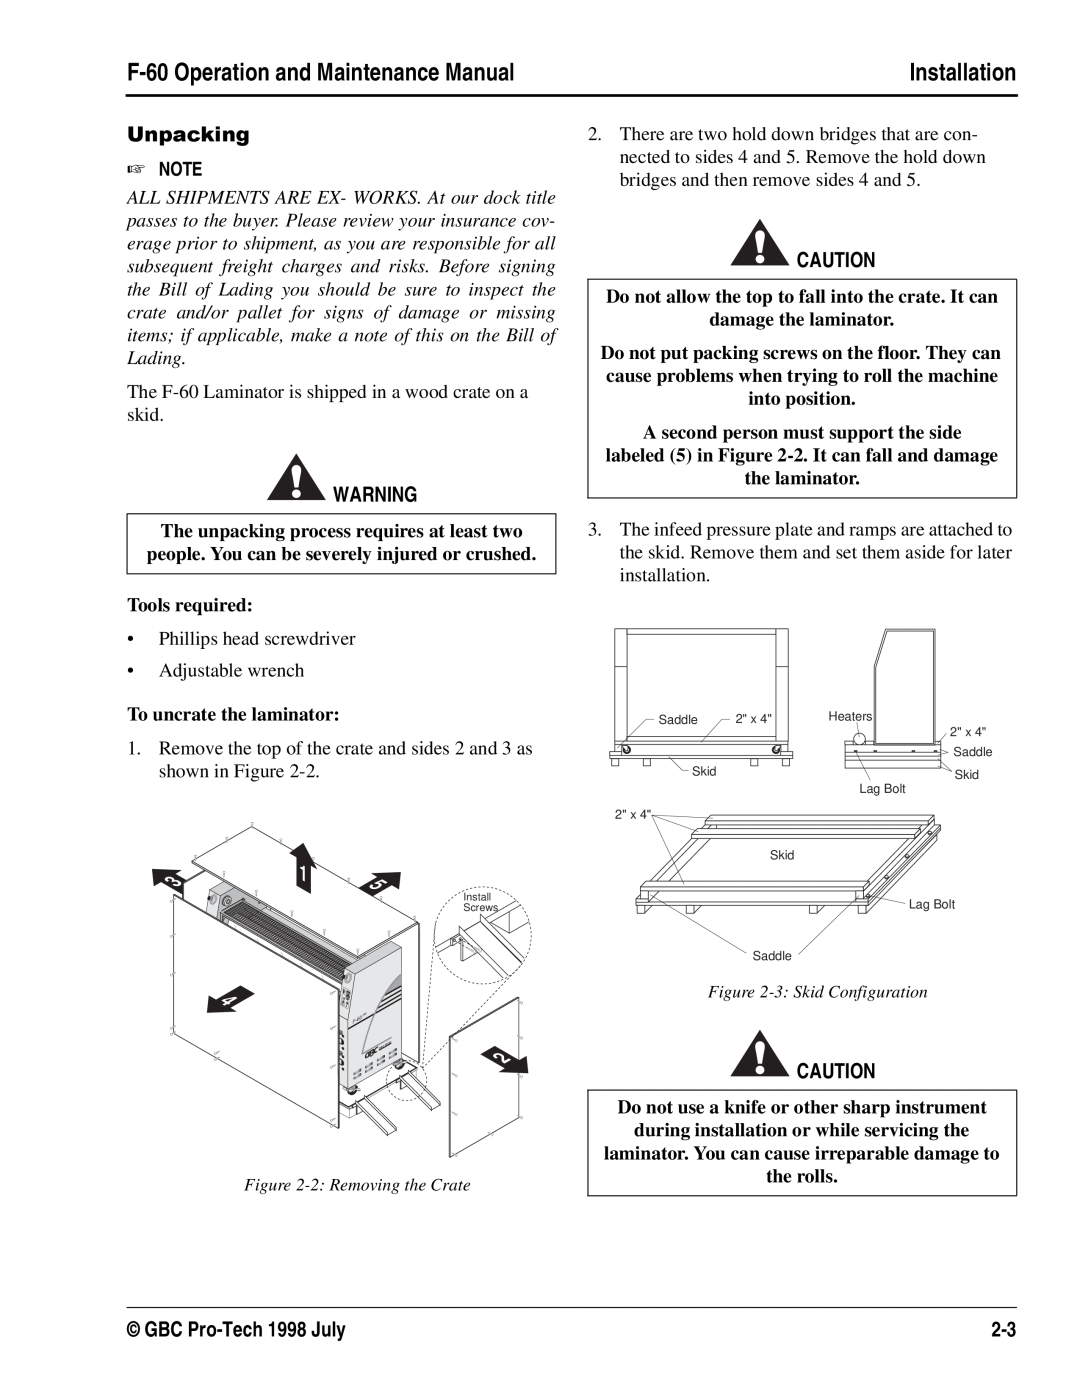 GBC manual Installation, GBC Pro-Tech 1998 July, The F-60 Laminator is shipped in a wood crate on a skid 